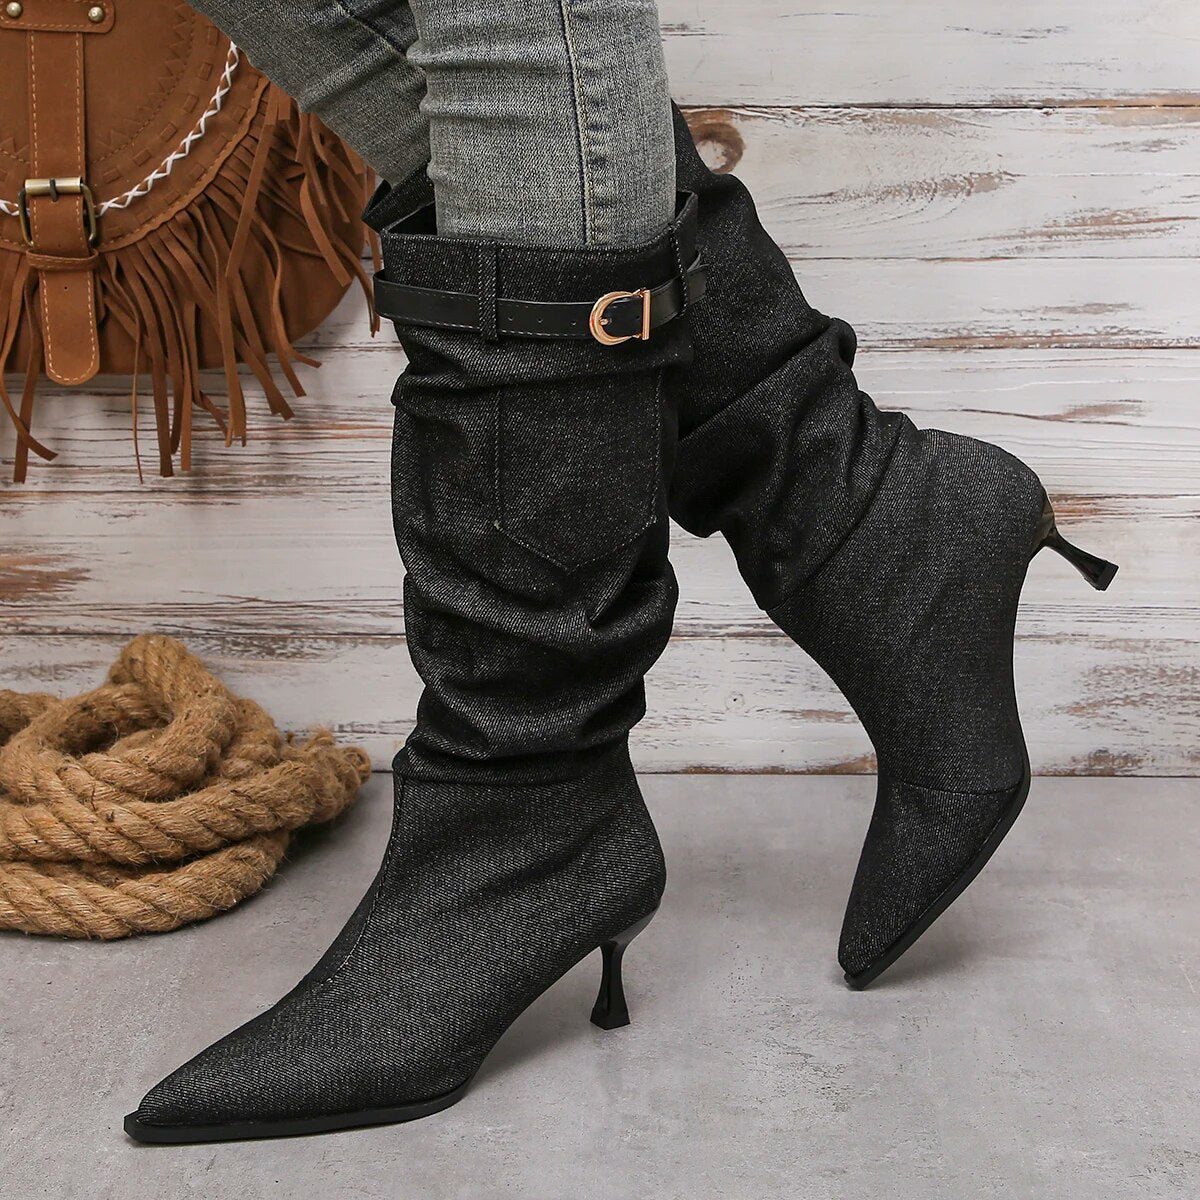 Gominglo - Pleated High Knee Denim Autumn Winter Boot for Women GOMINGLO